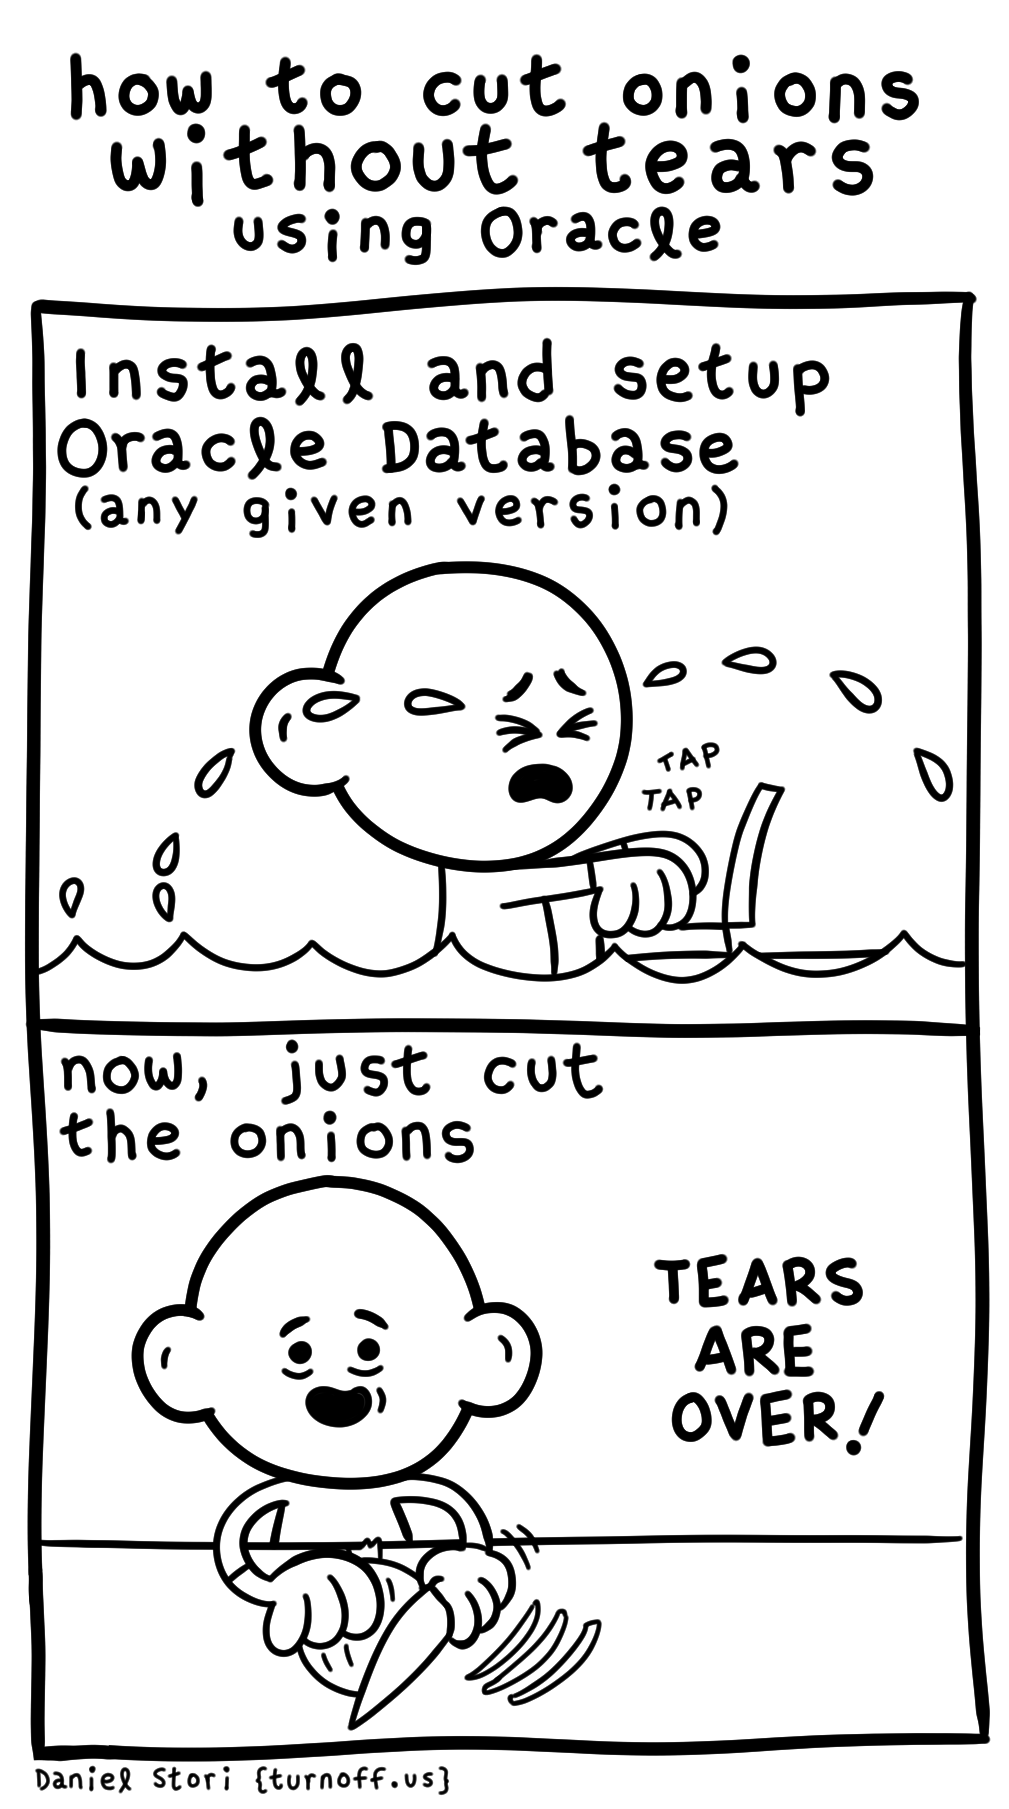 how to cut onions without tears (using oracle) geek comic